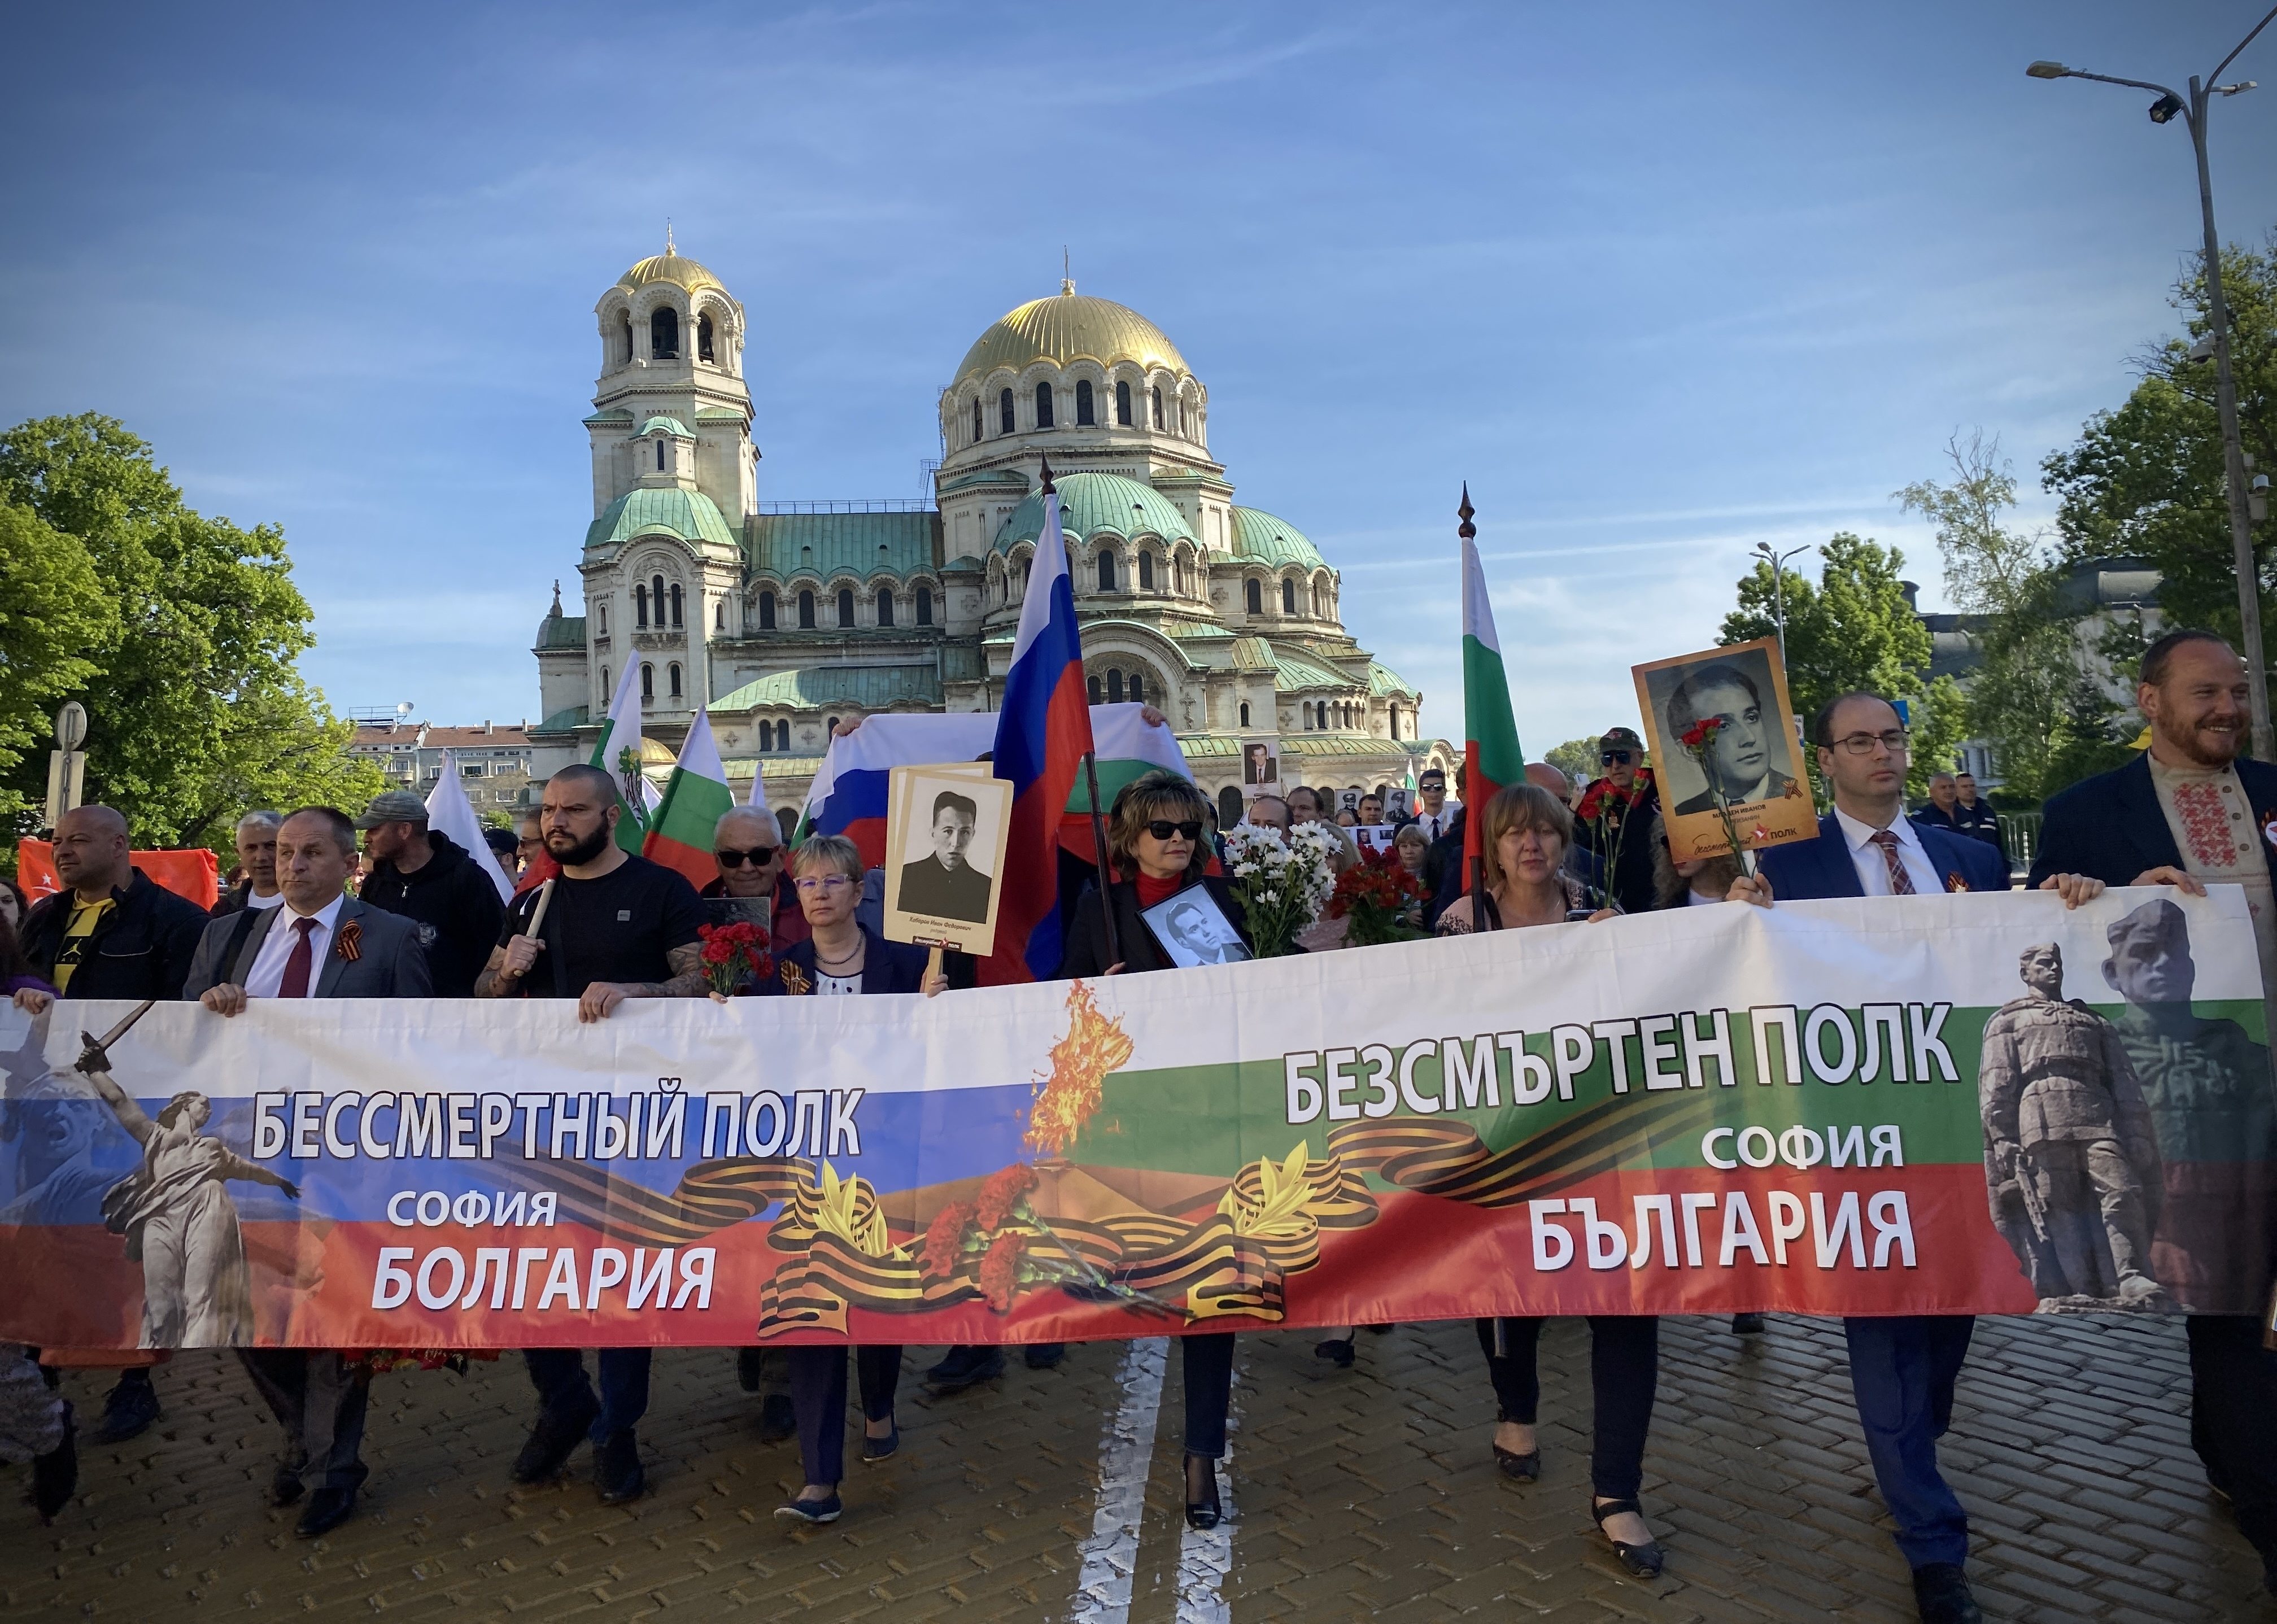 Europe Day and Victory Day in Bulgaria